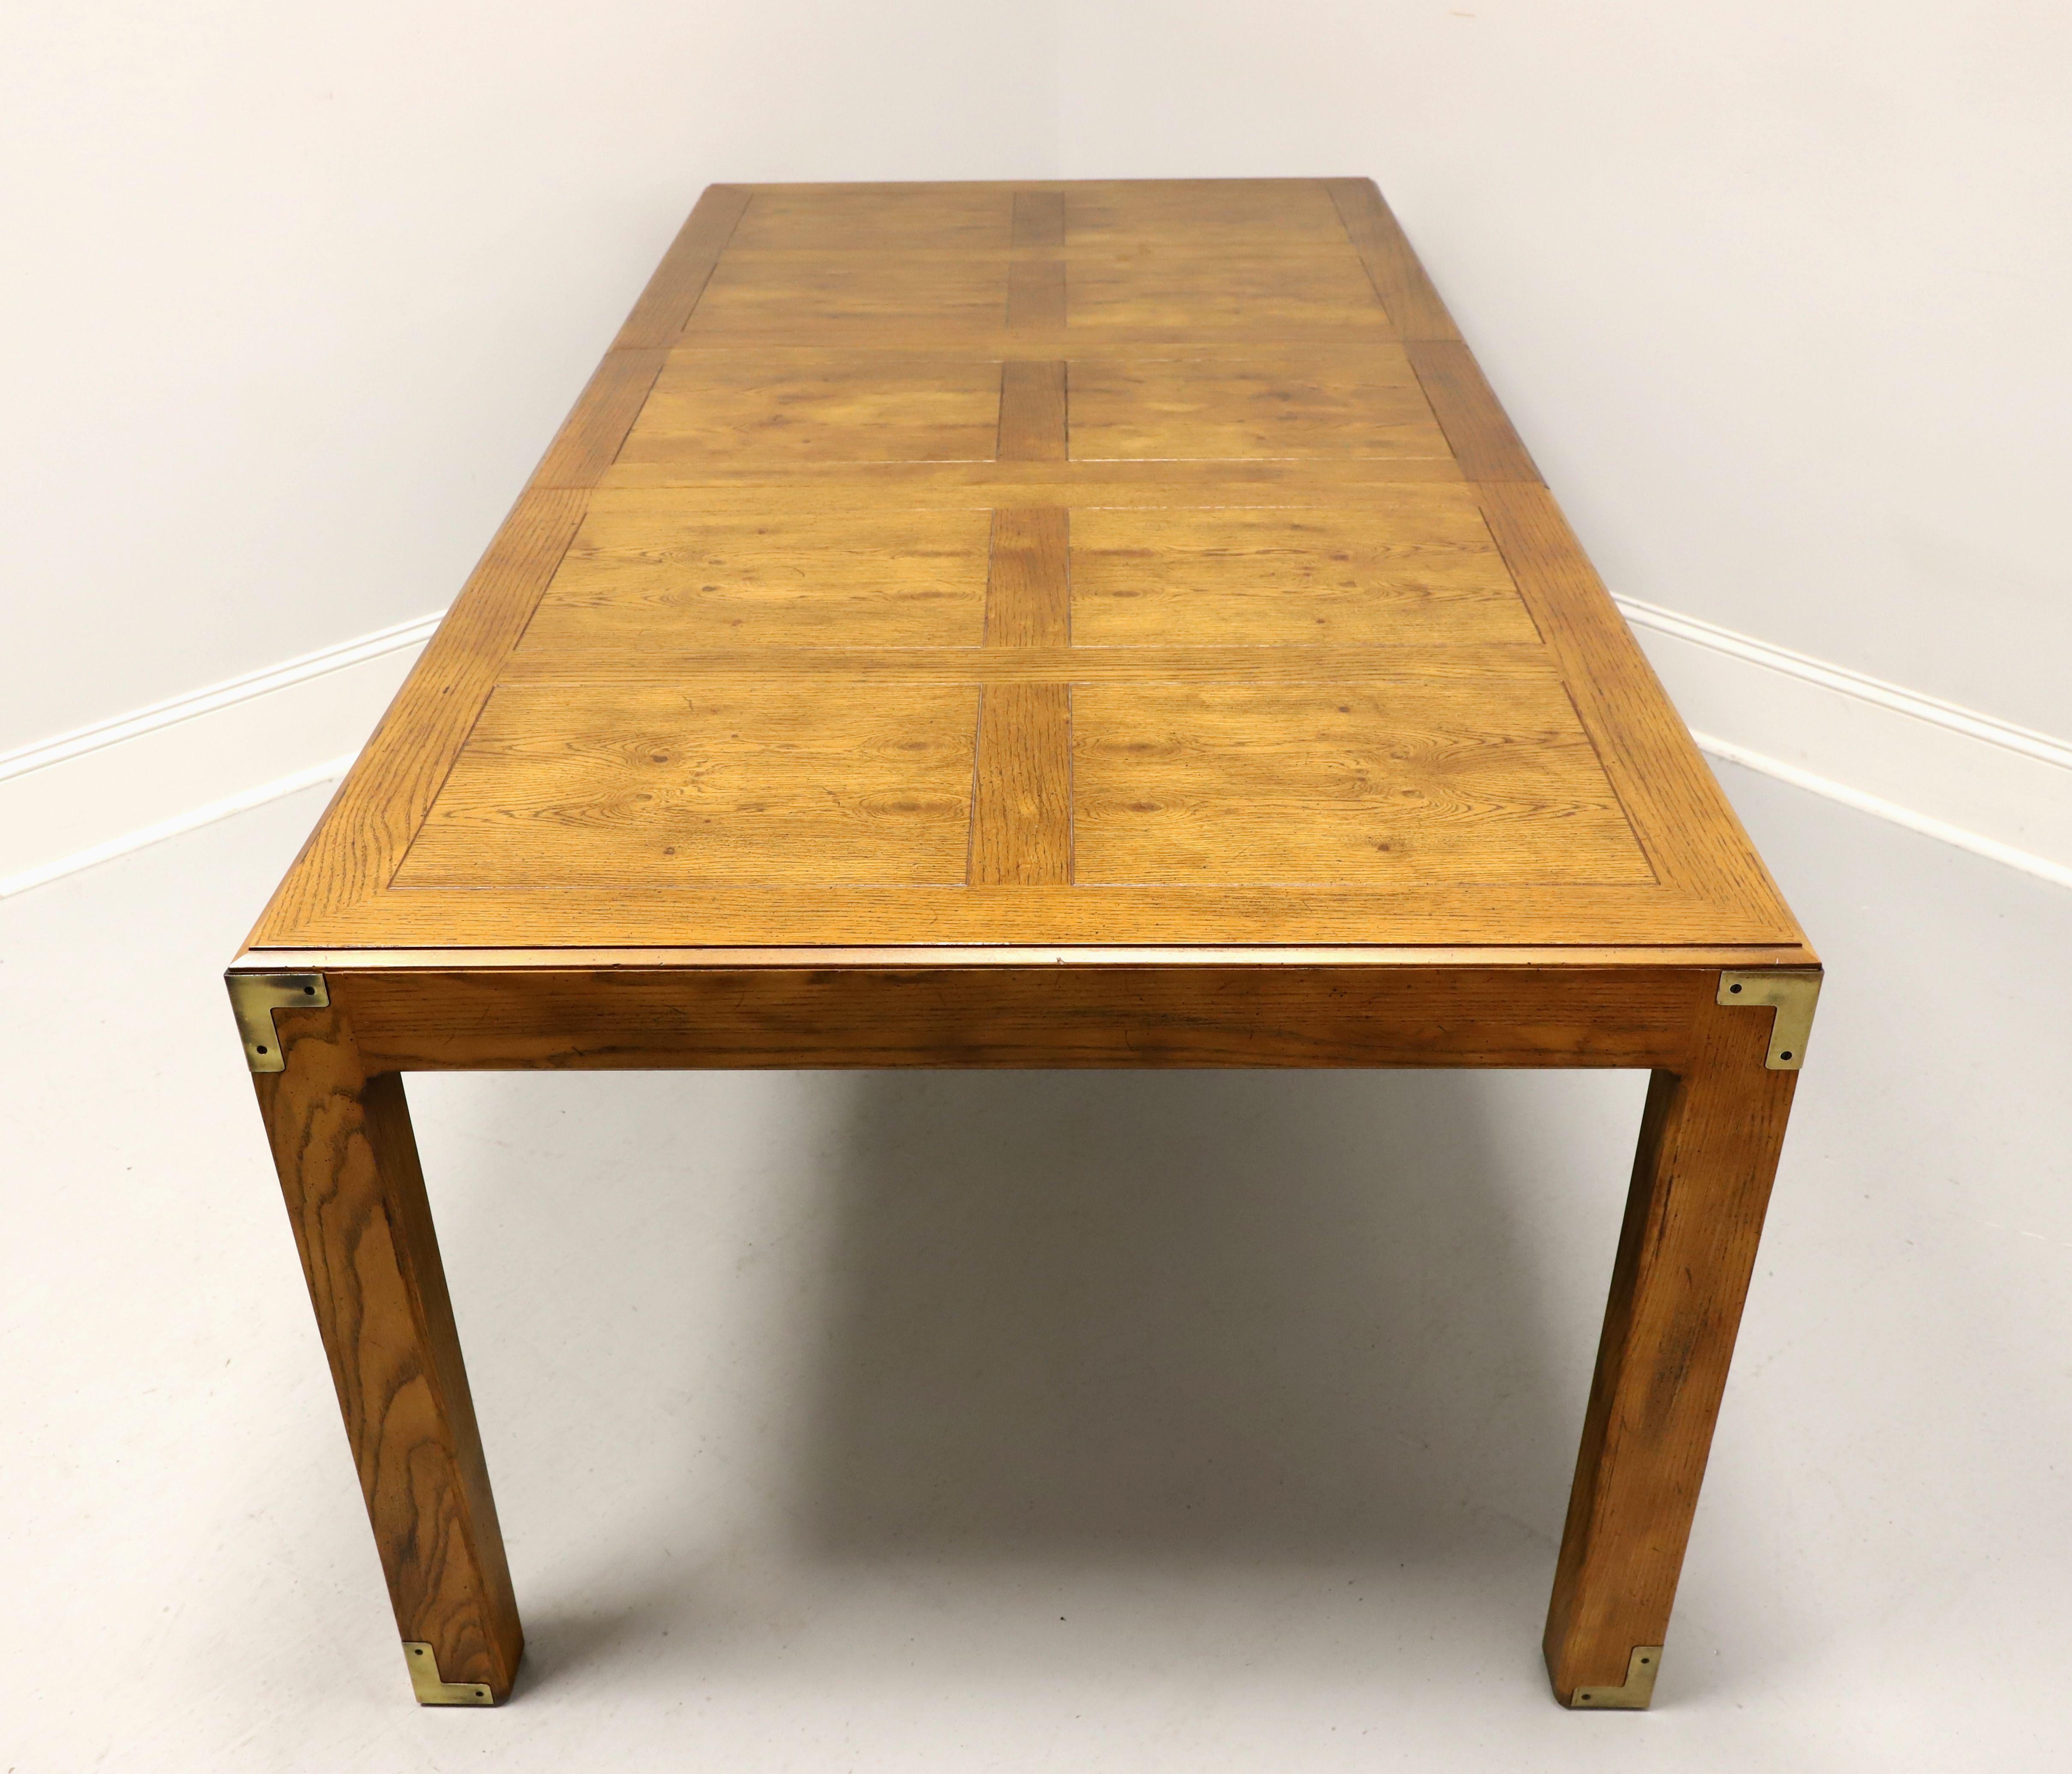 20th Century HENREDON Artefacts Knotty Oak Rectangular Campaign Style Dining Table